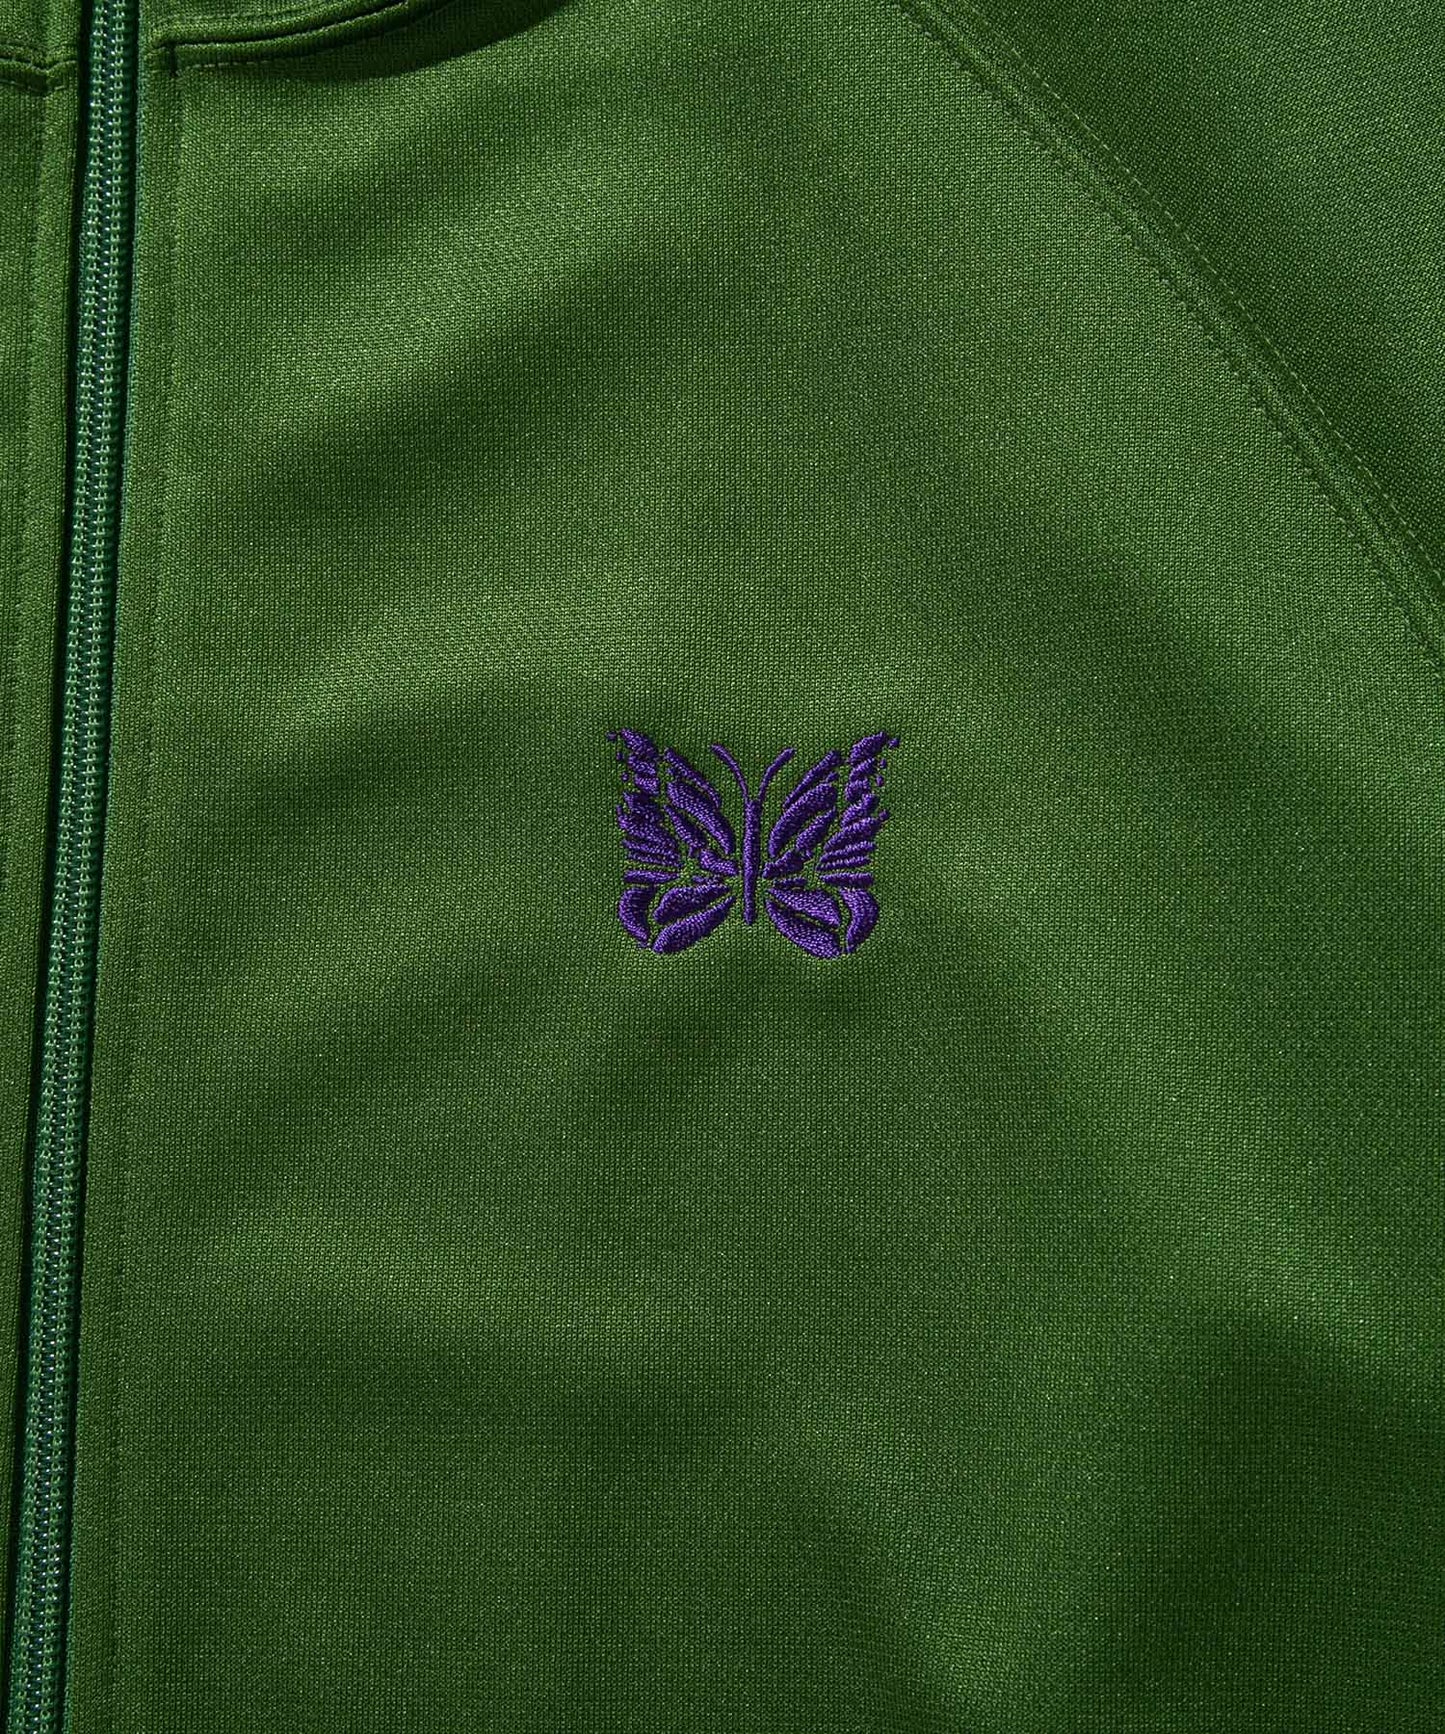 NEEDLES Track Jacket - Poly Smooth Ivy Green